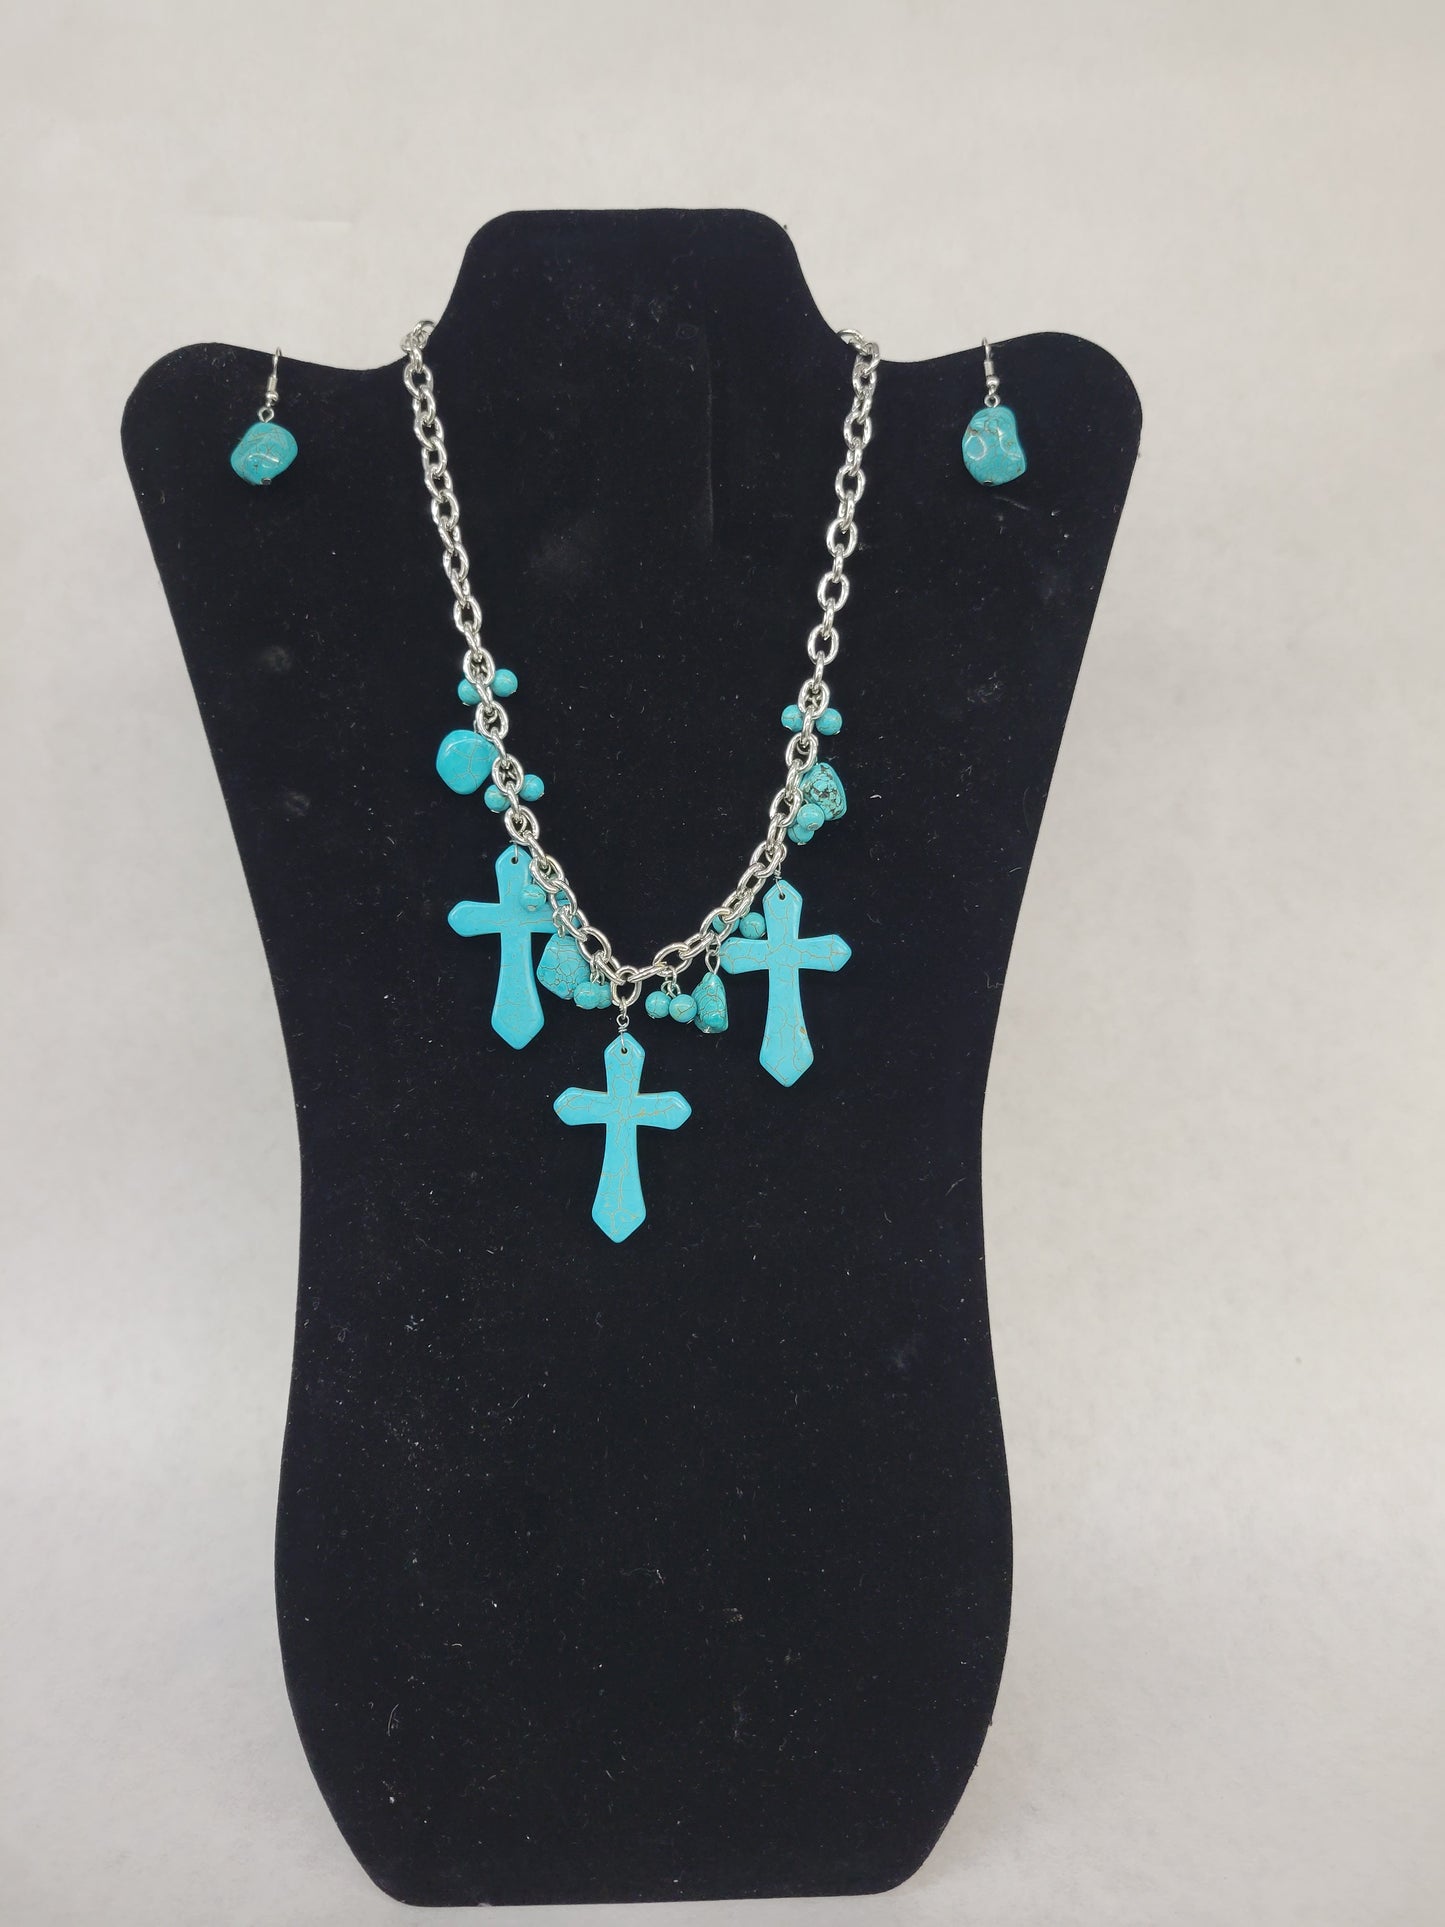 Turquoise Stone/Cross Necklace and Earring Set